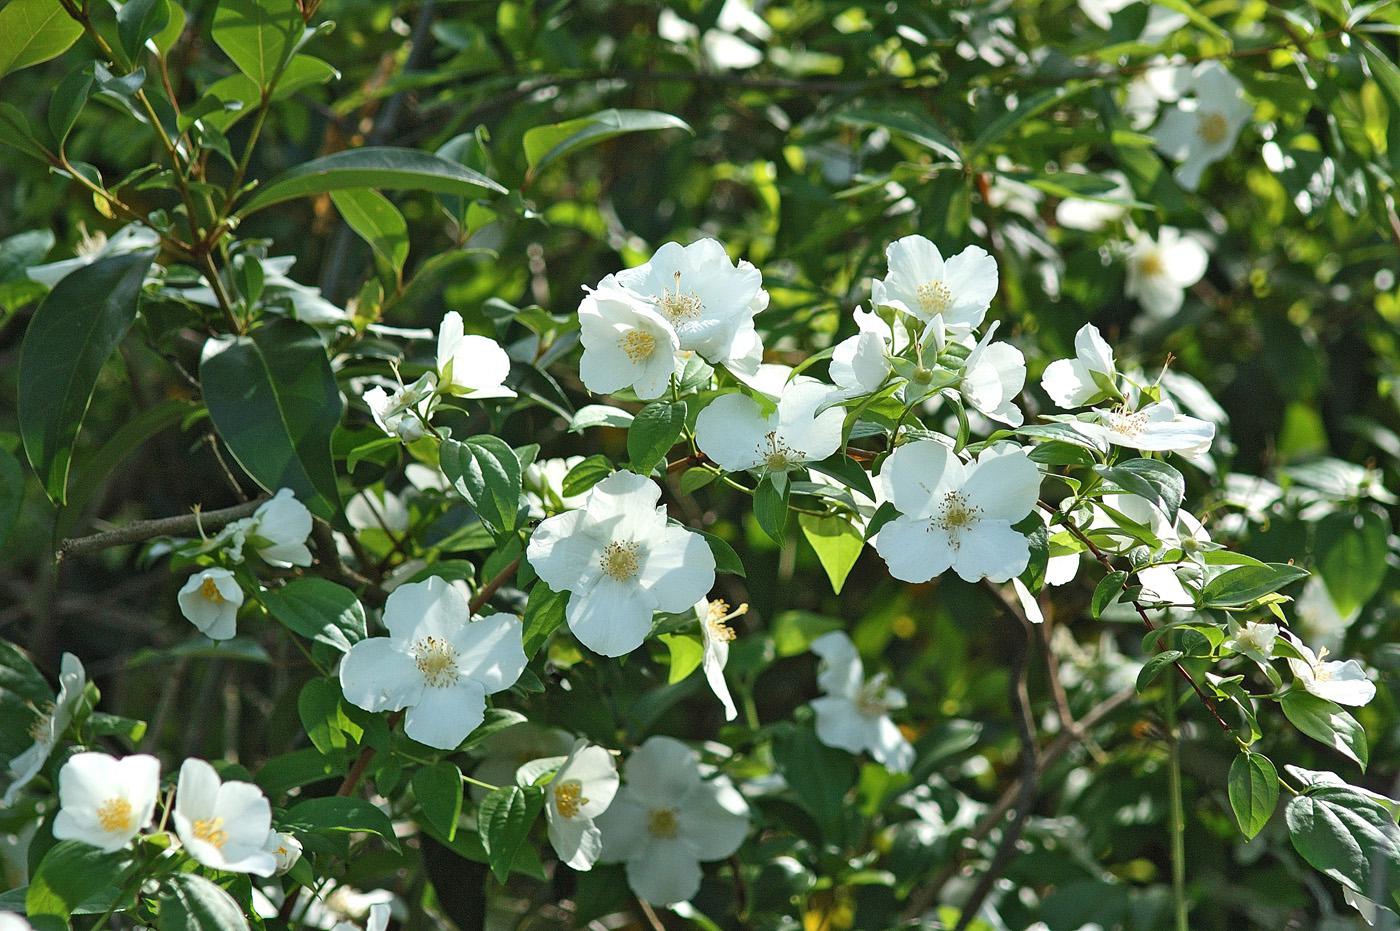 The English dogwood's blooms are produced by the hundreds along arching stems, forming a beautiful, fountain-like appearance. (Photo by Norman Winter)